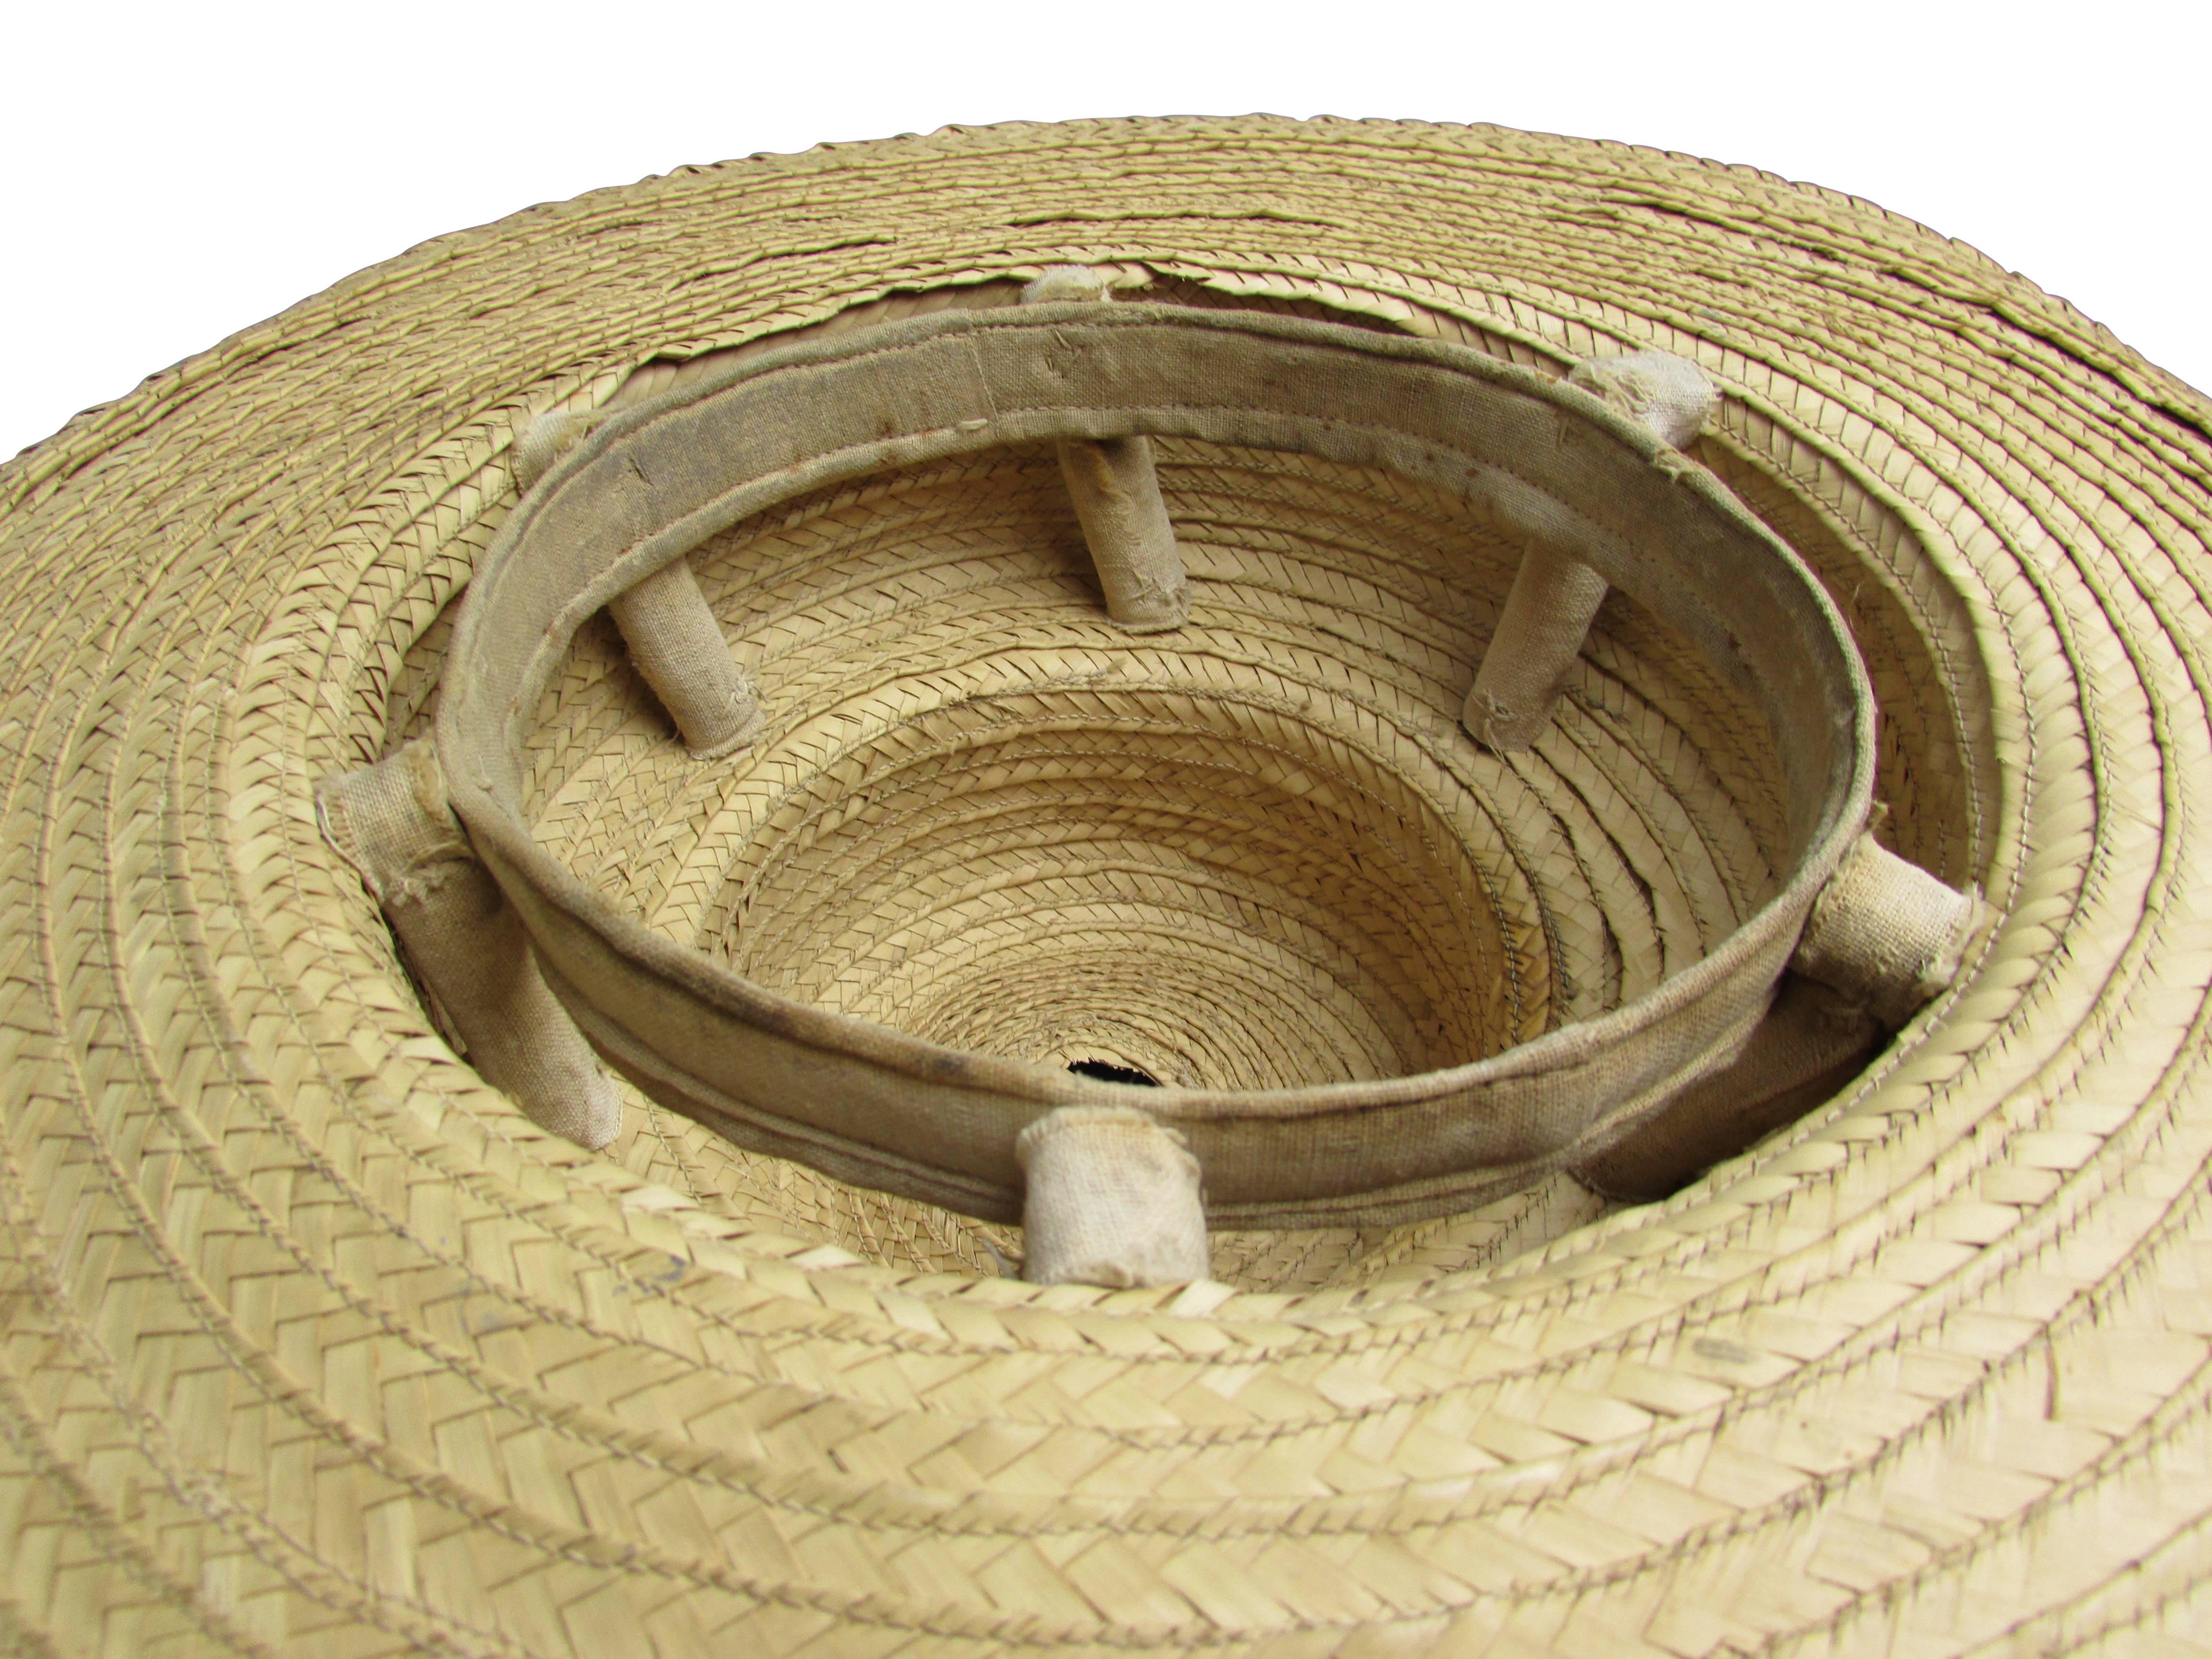 Straw Early Two-Tiered Shaker Hat